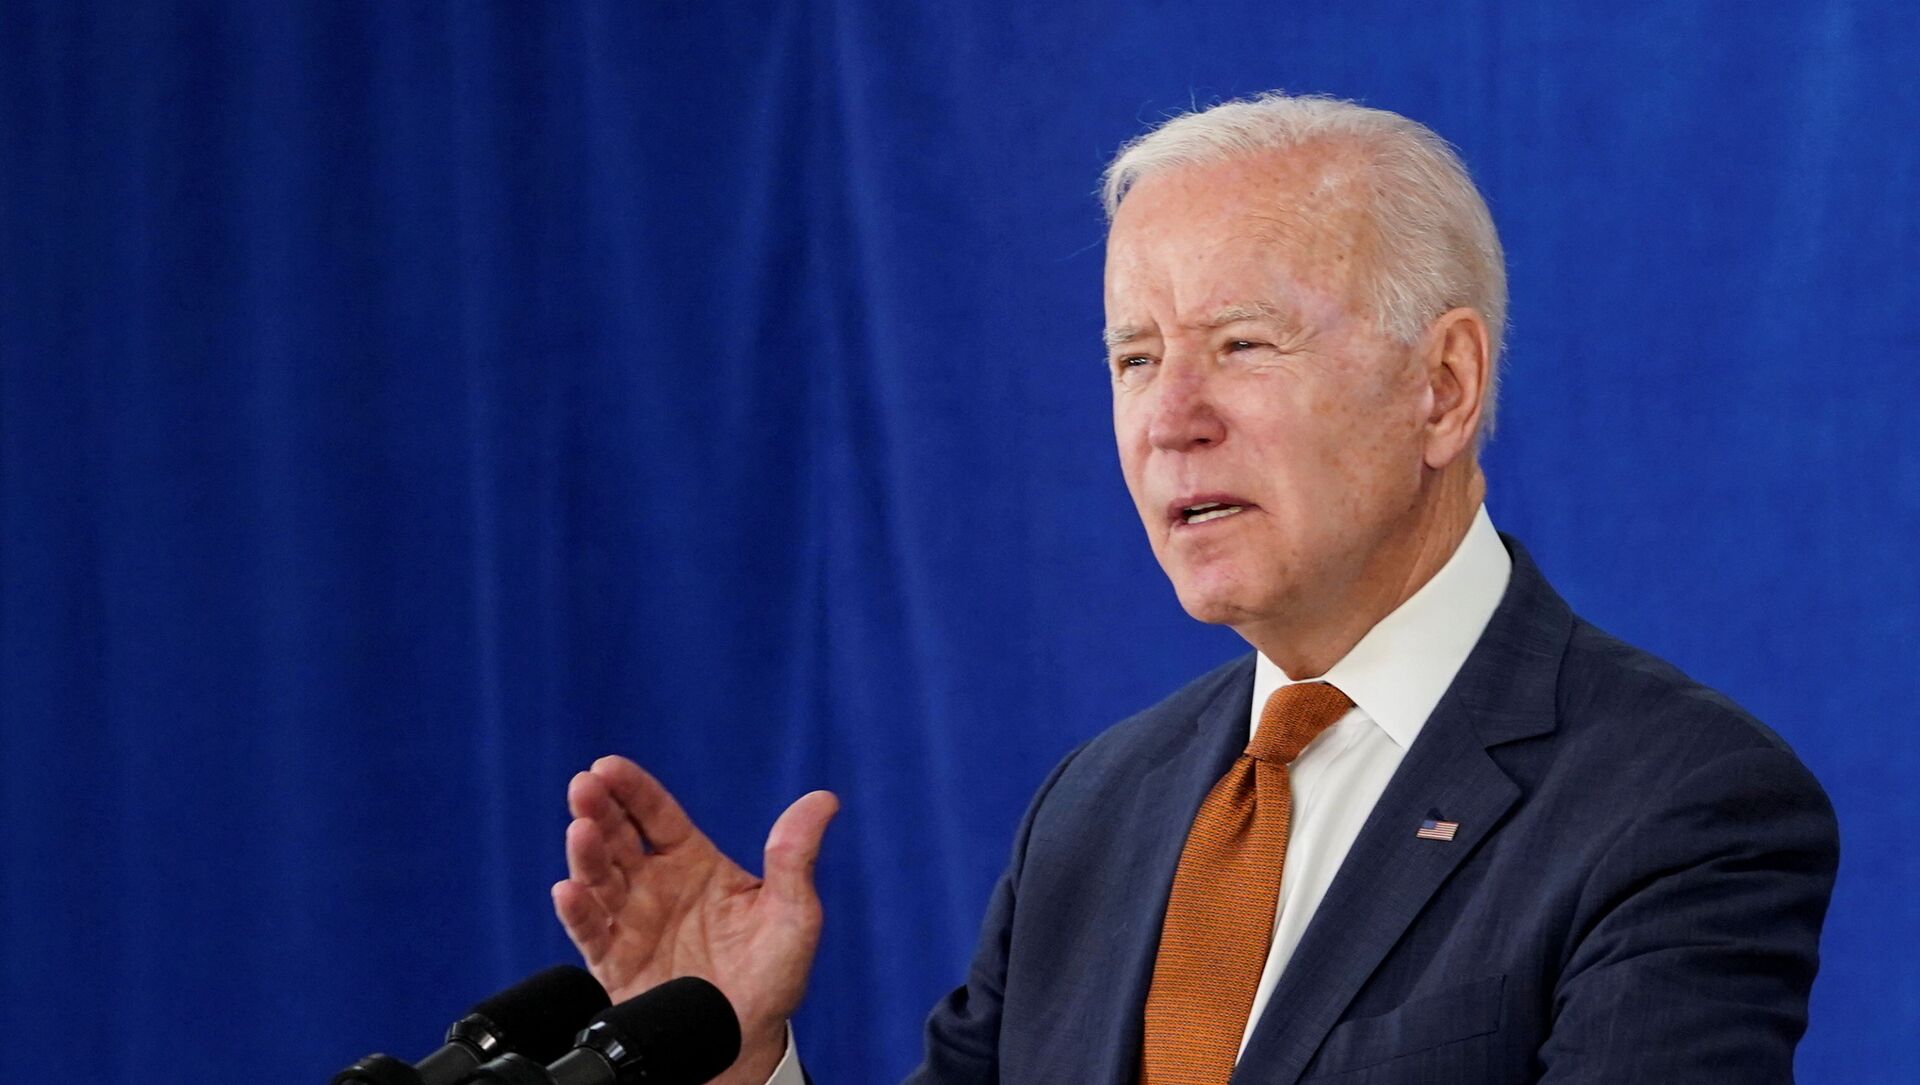 U.S. President Joe Biden delivers remarks on the May jobs report after U.S. employers boosted hiring amid the easing coronavirus disease (COVID-19) pandemic, at the Rehoboth Beach Convention Center in Rehoboth Beach, Delaware, U.S., June 4, 2021 - Sputnik International, 1920, 13.06.2021